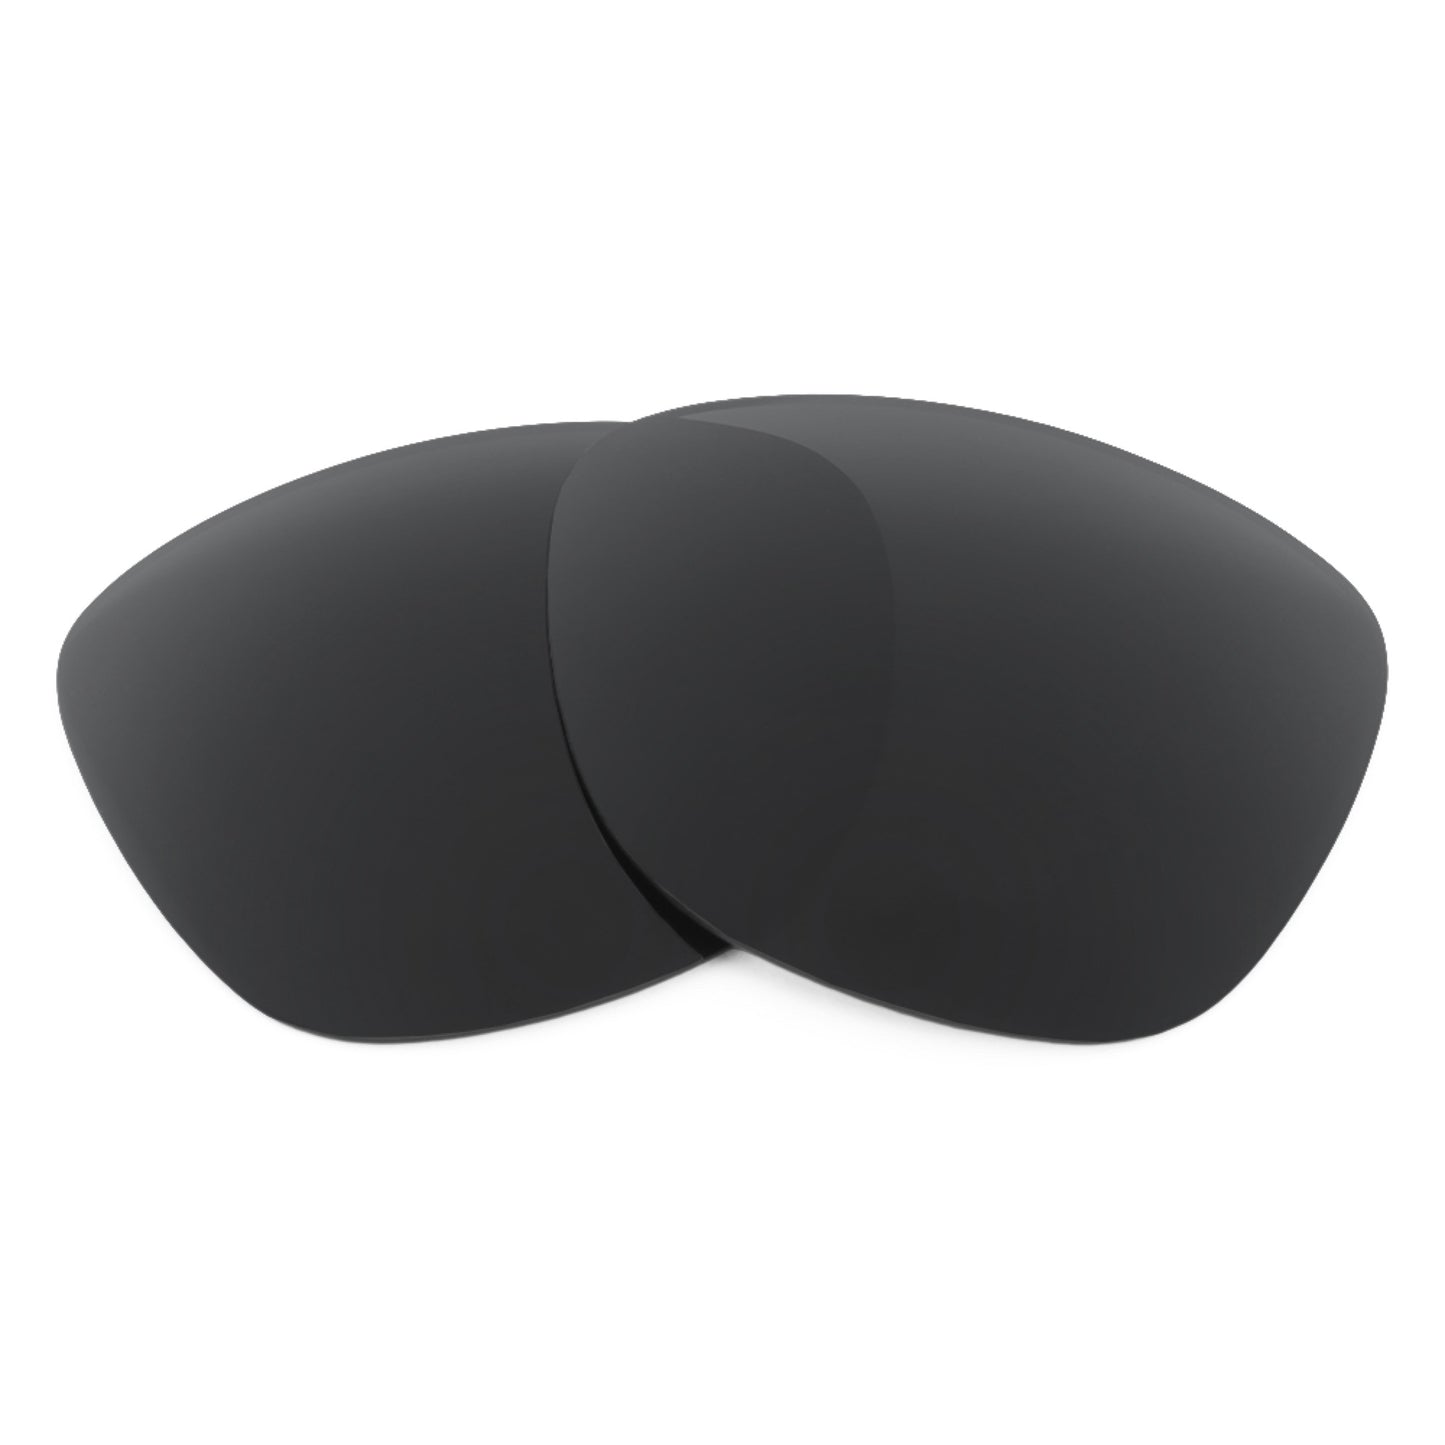 Revant replacement lenses for Ray-Ban Justin Classic RB4165 55mm Non-Polarized Stealth Black